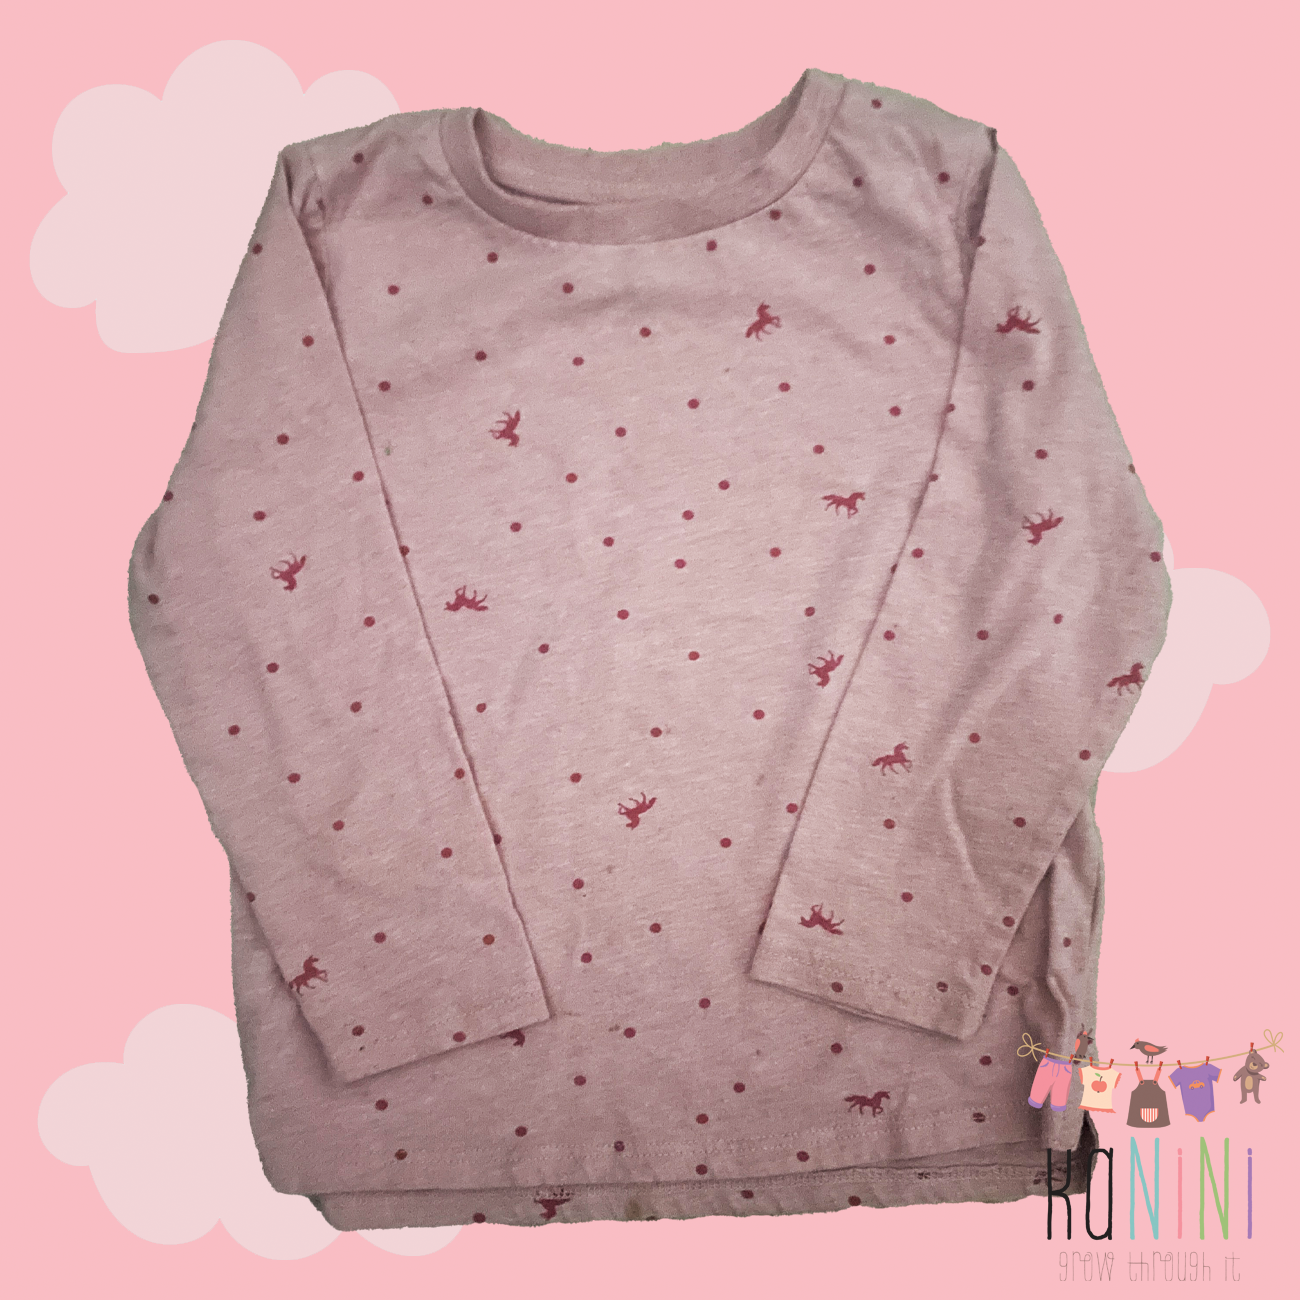 Featured image for “Cotton On 3 Years Girls Long Sleeve T-Shirt”